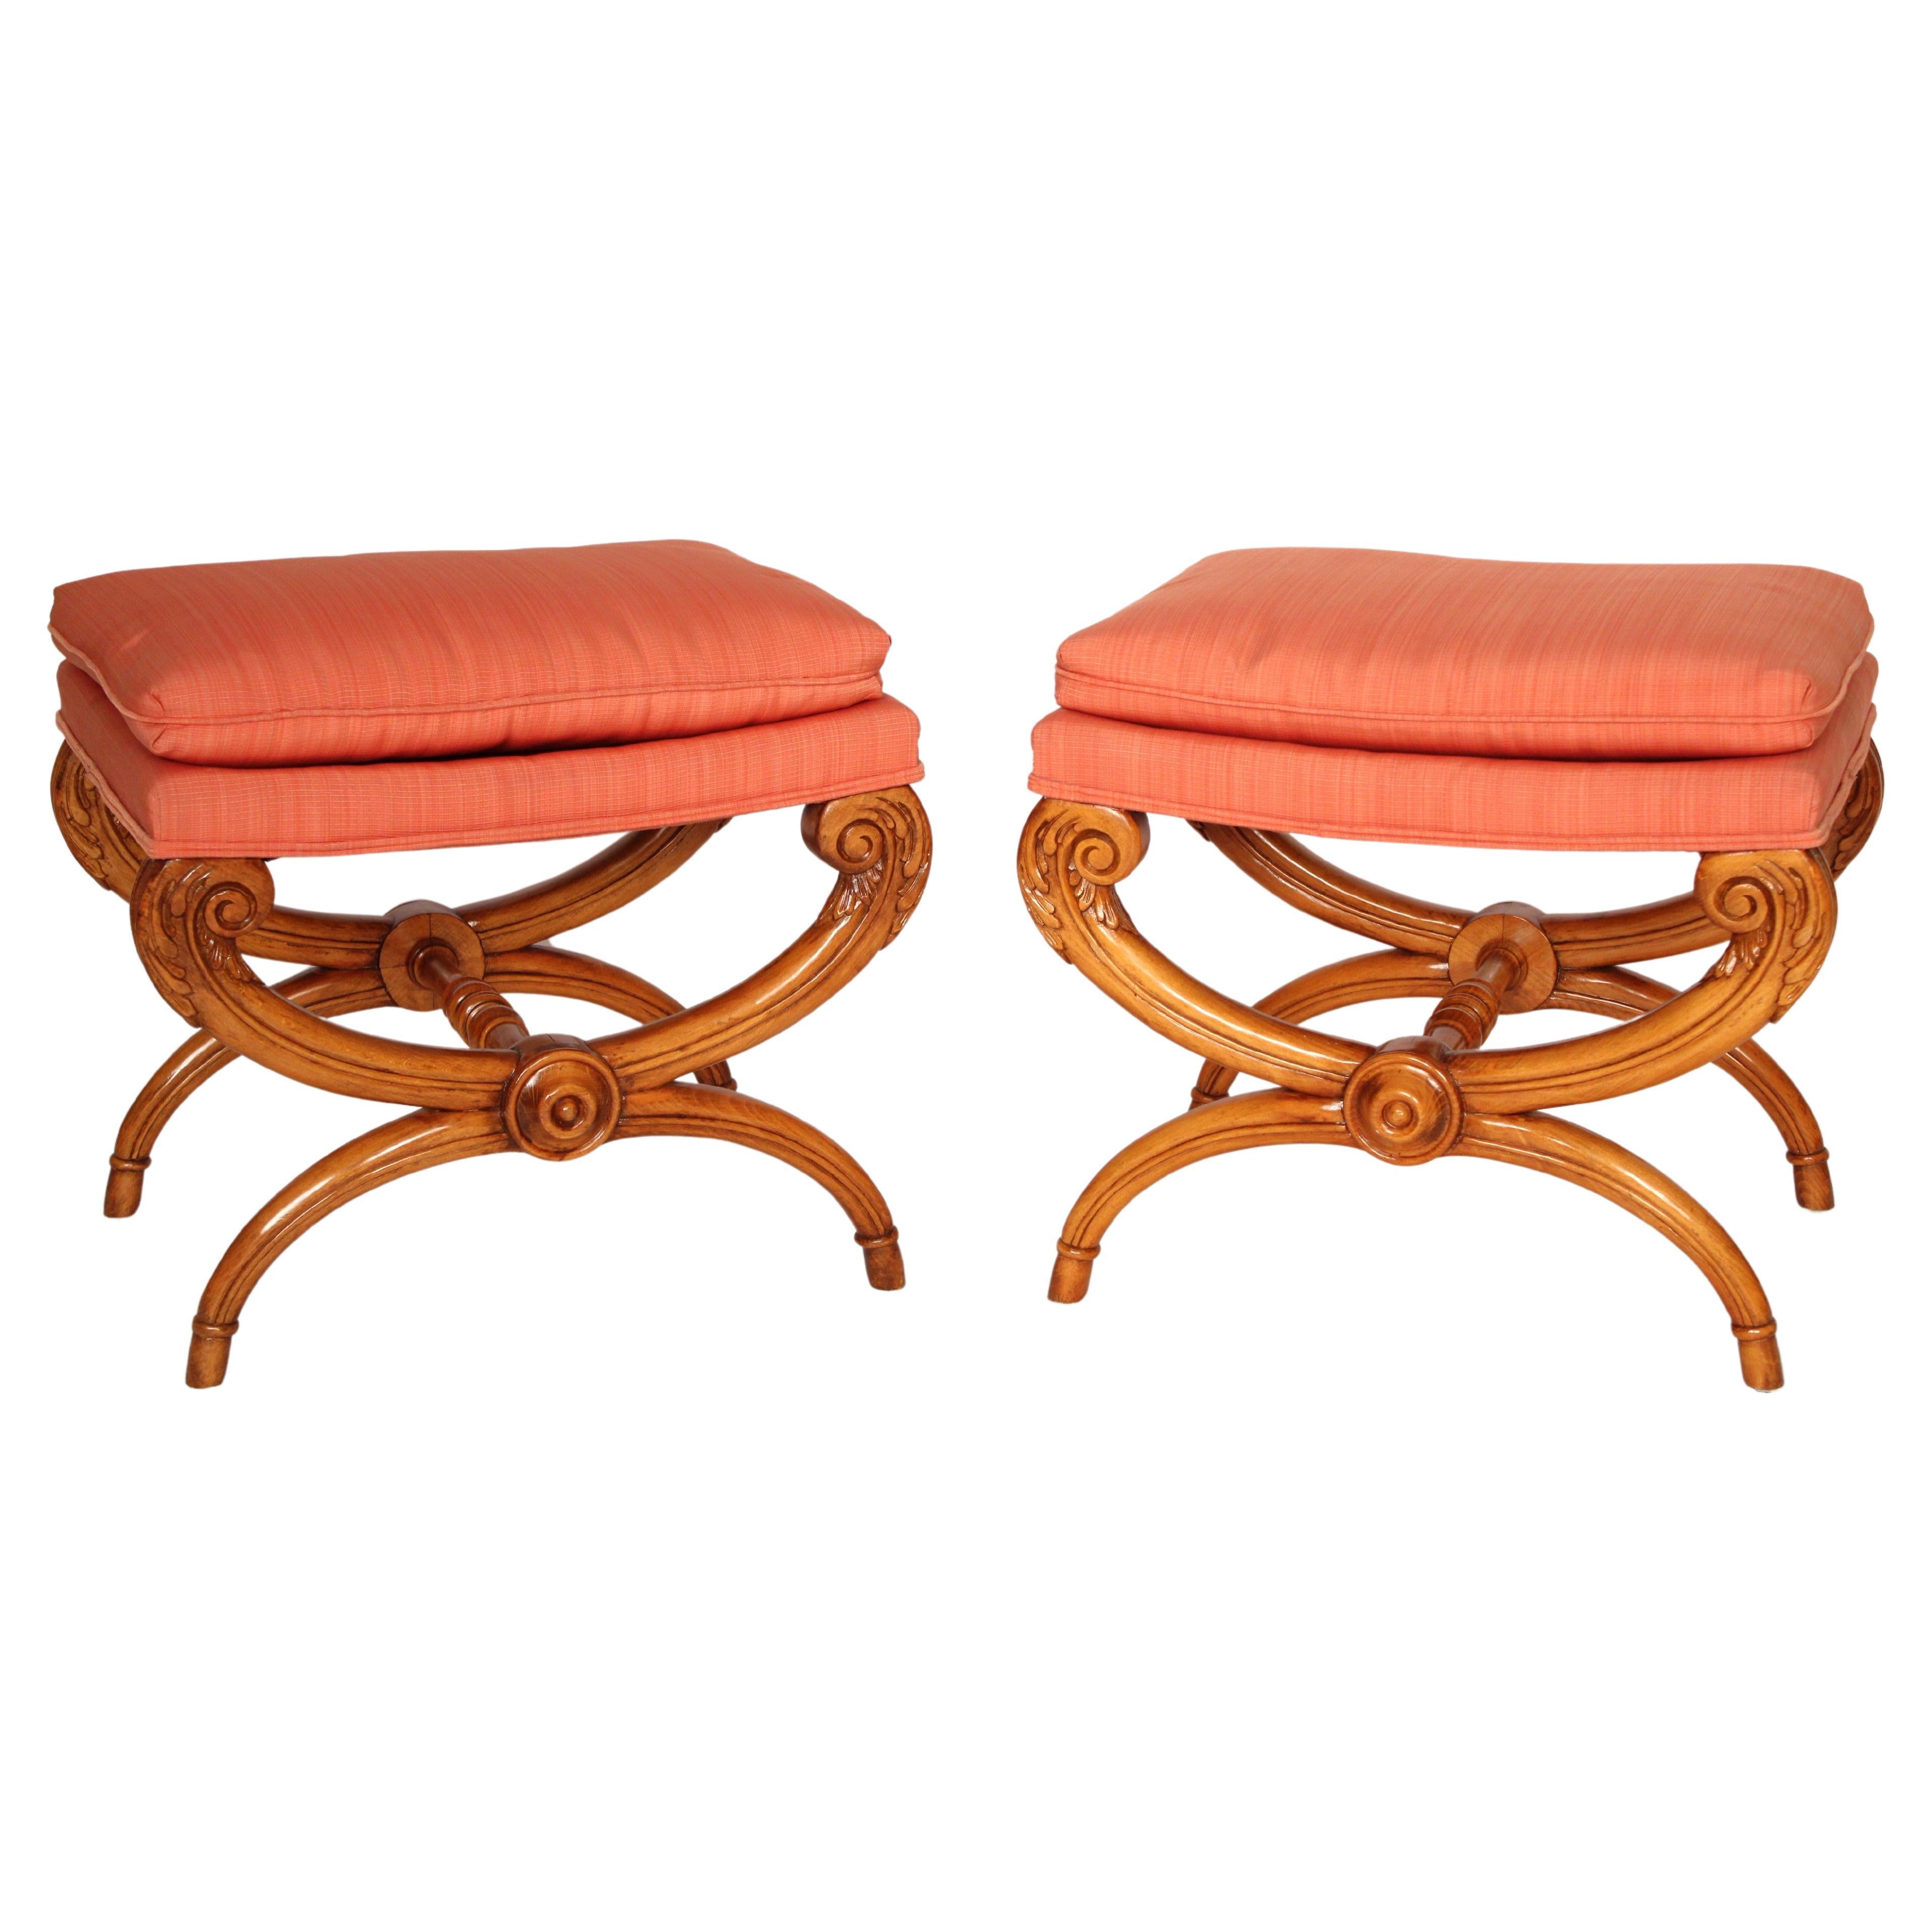 Pair of neo classical Style Benches